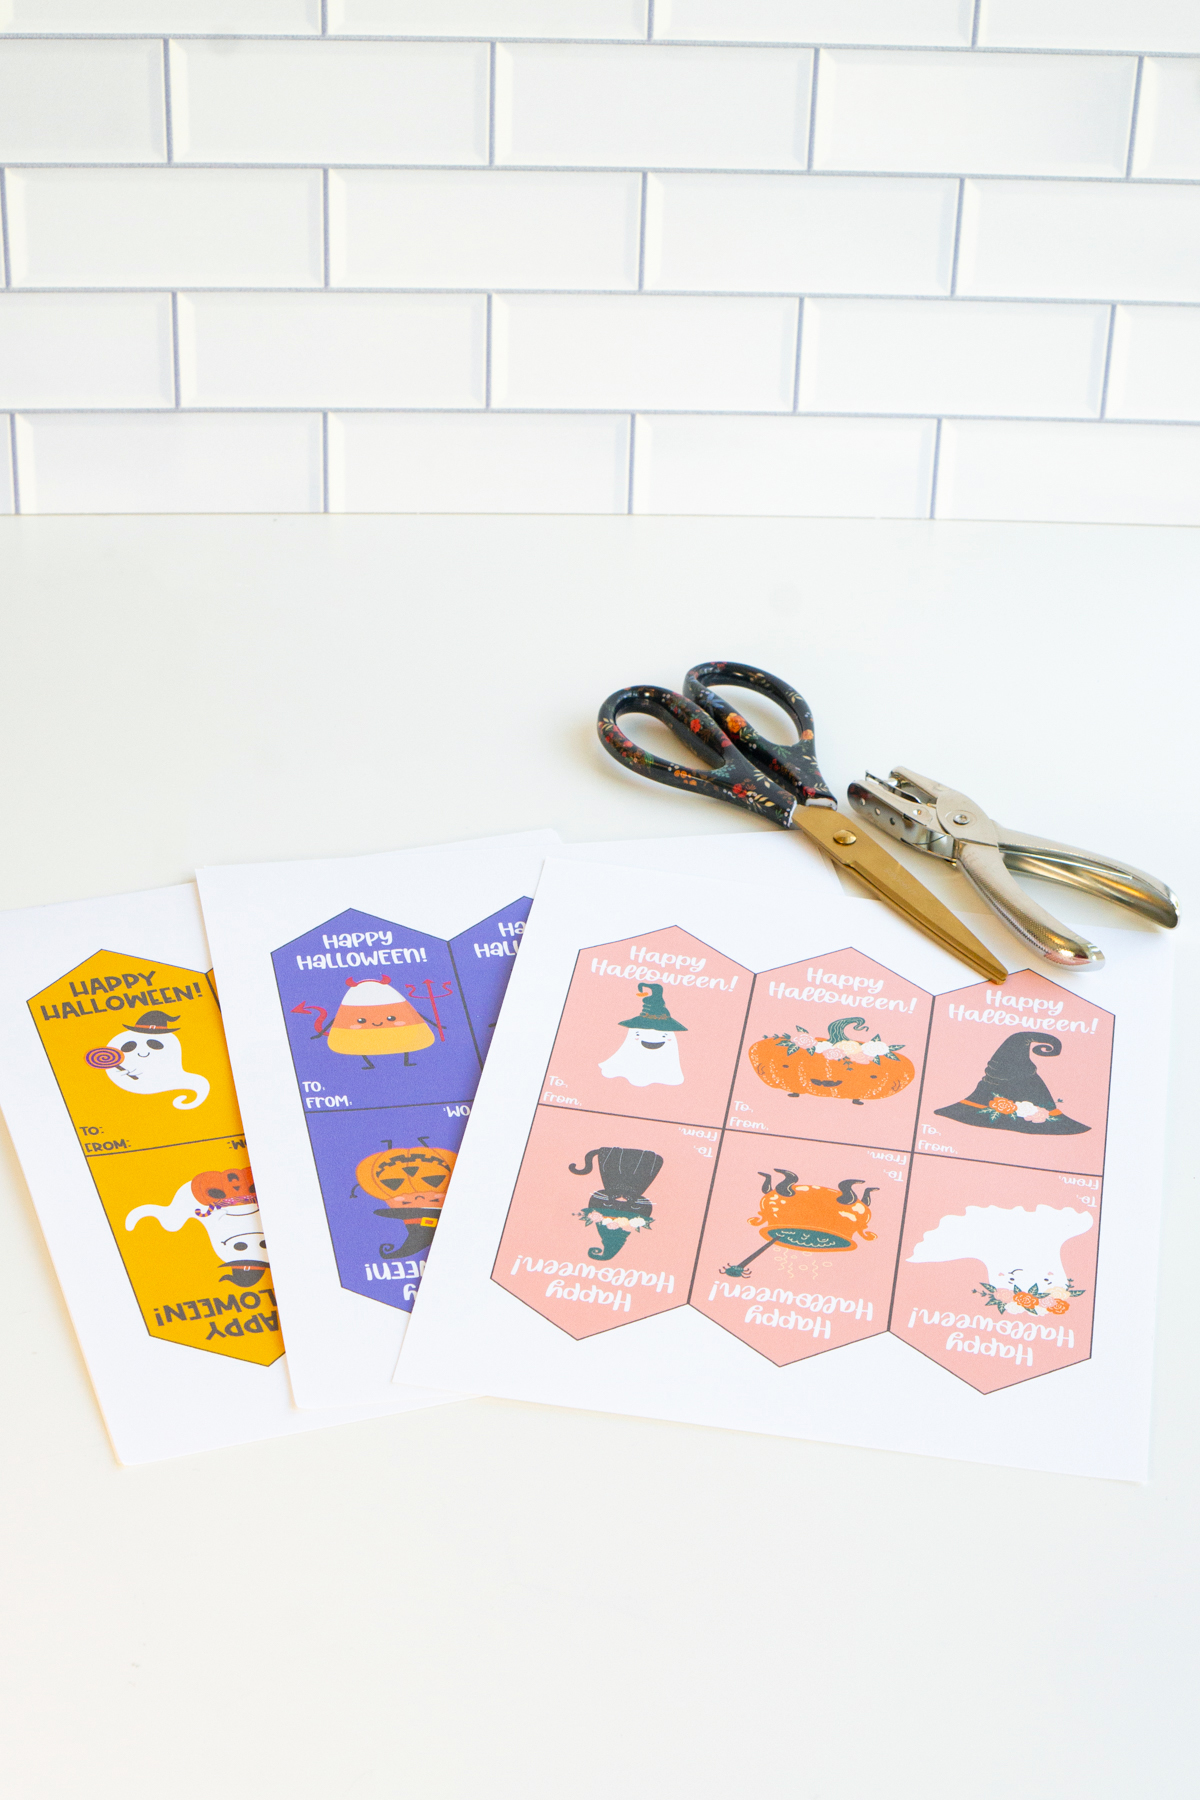 This image shows the free Happy Halloween printable tags before being cut with some scissors and a hole punch.